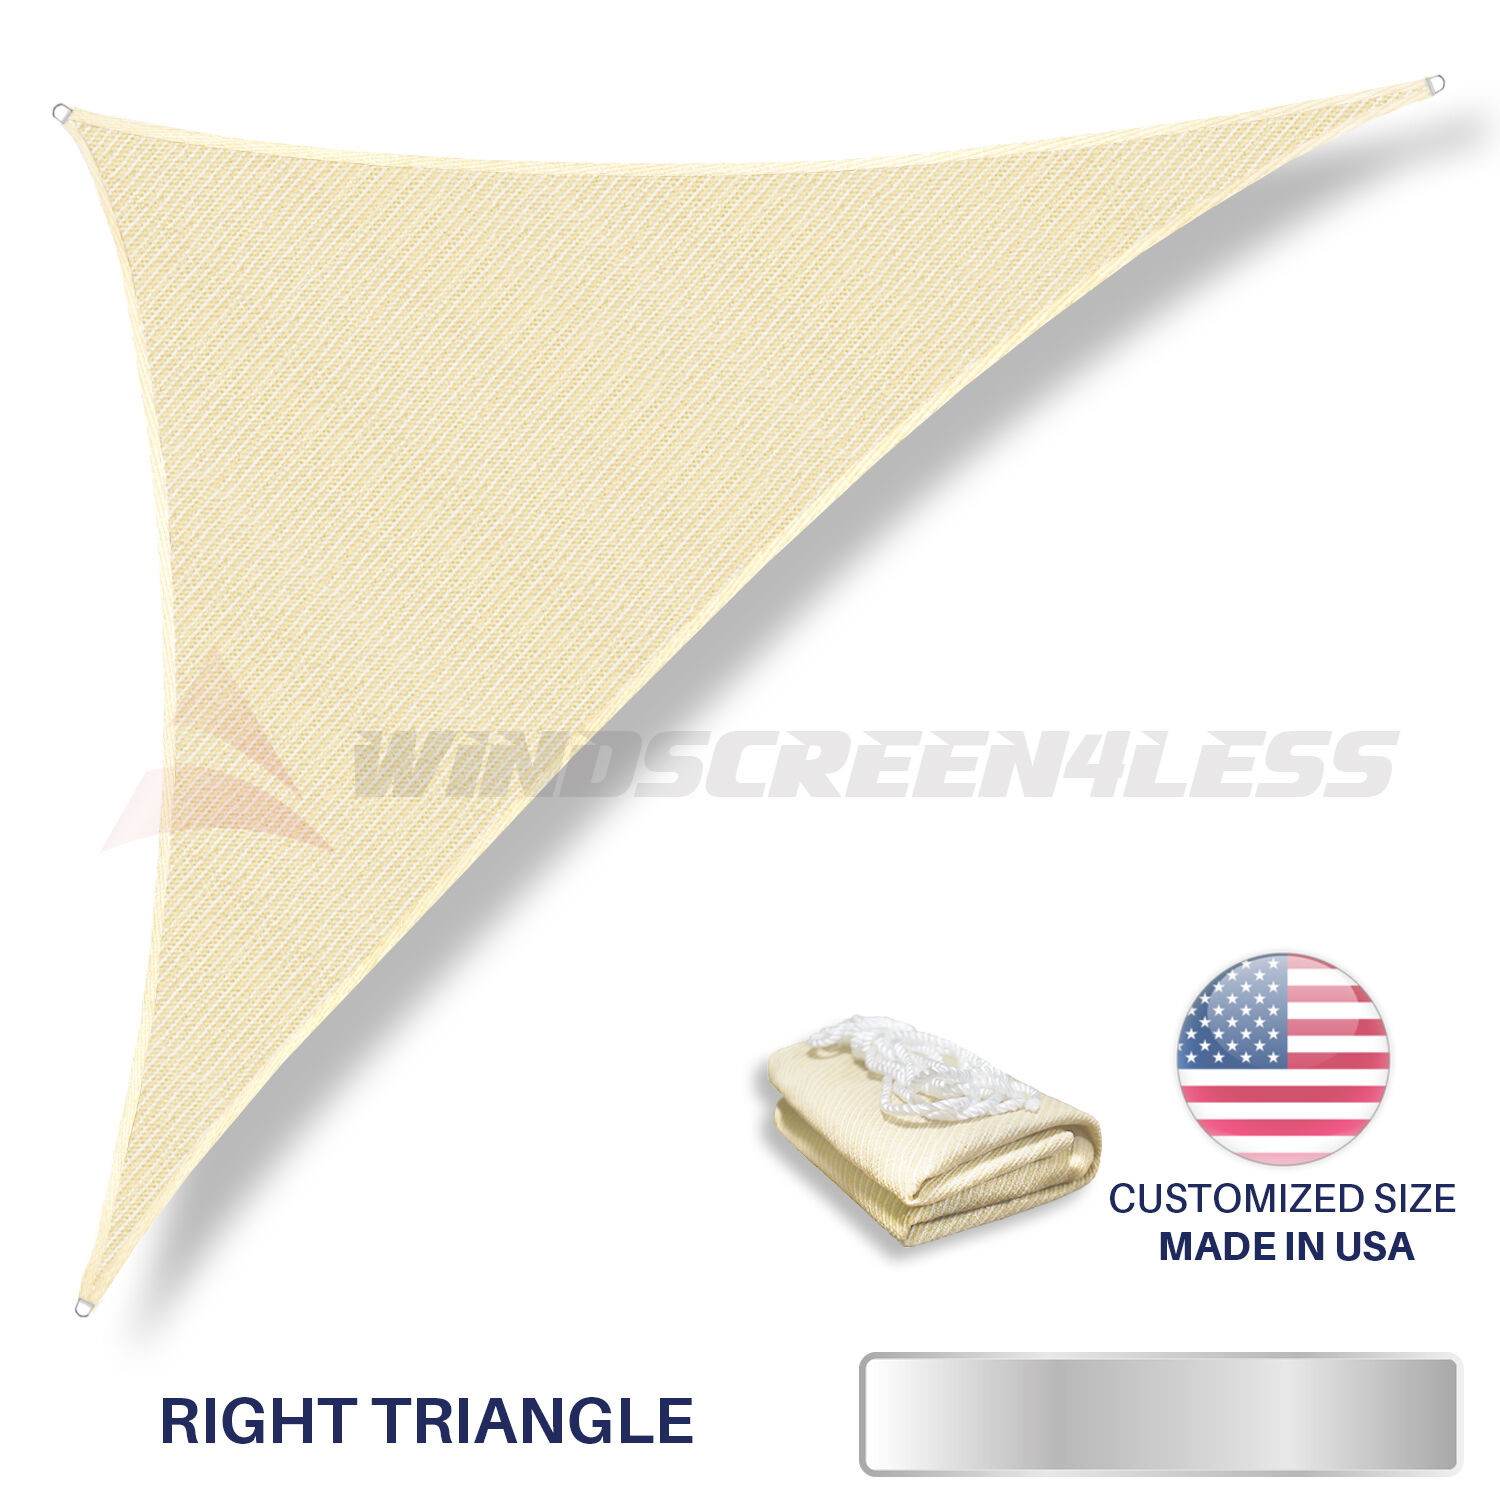 Right Triangle Sun Shade Sail Uv Top Cover Patio Pool Awning Canopy Beige / Blue